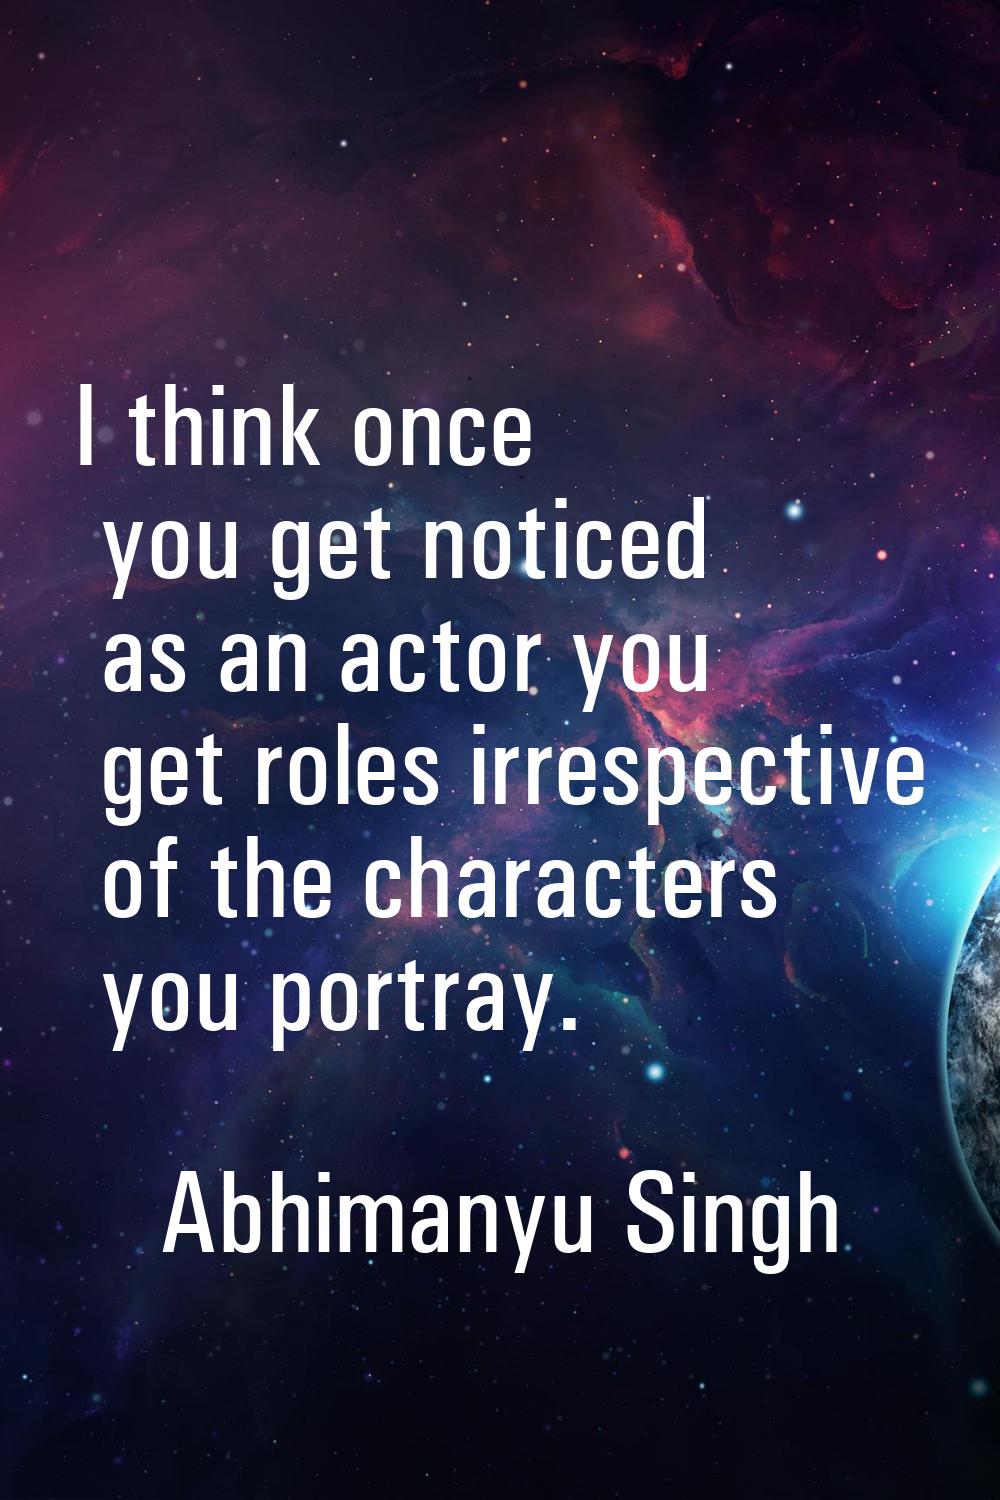 I think once you get noticed as an actor you get roles irrespective of the characters you portray.